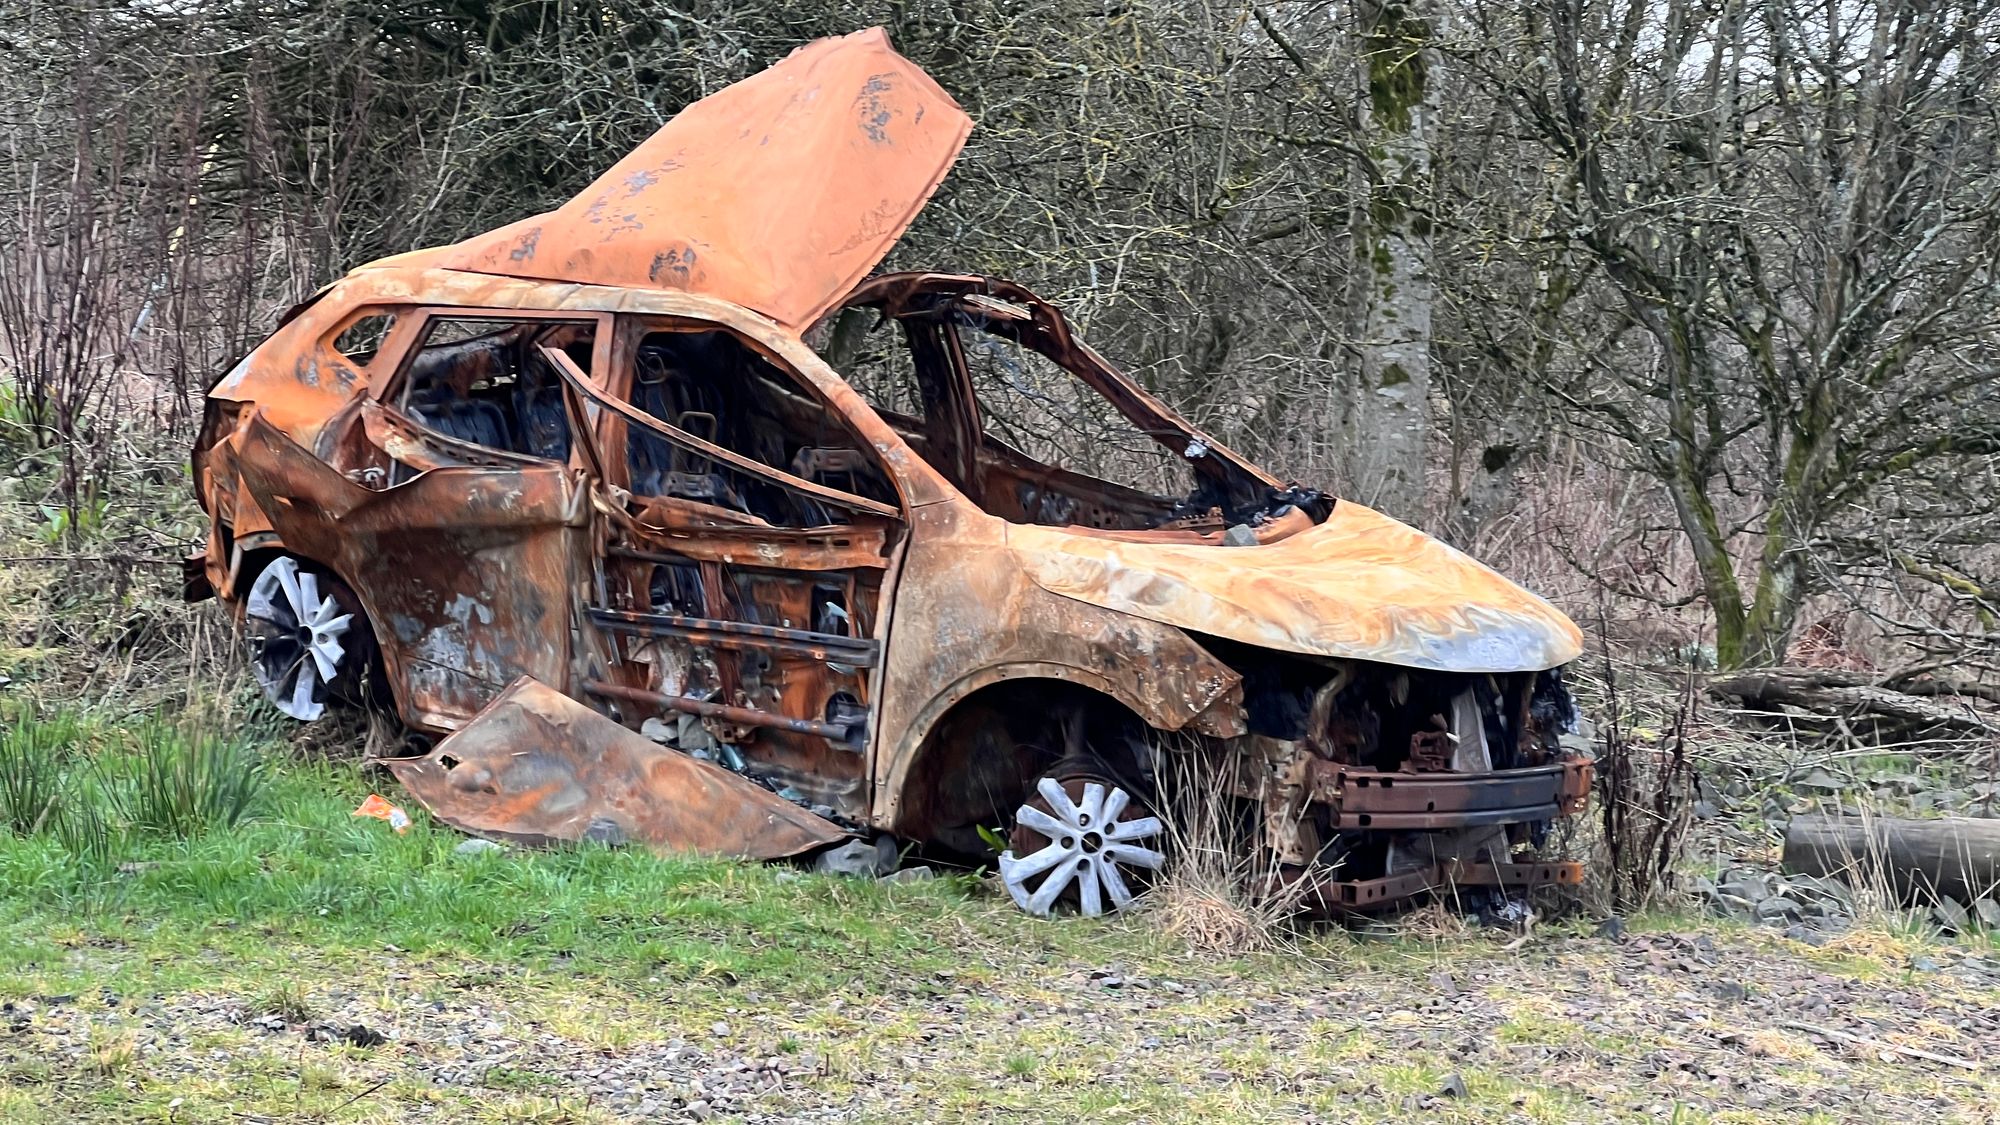 A burned out car on route was the largest price of abandoned rubbish we had to walk past